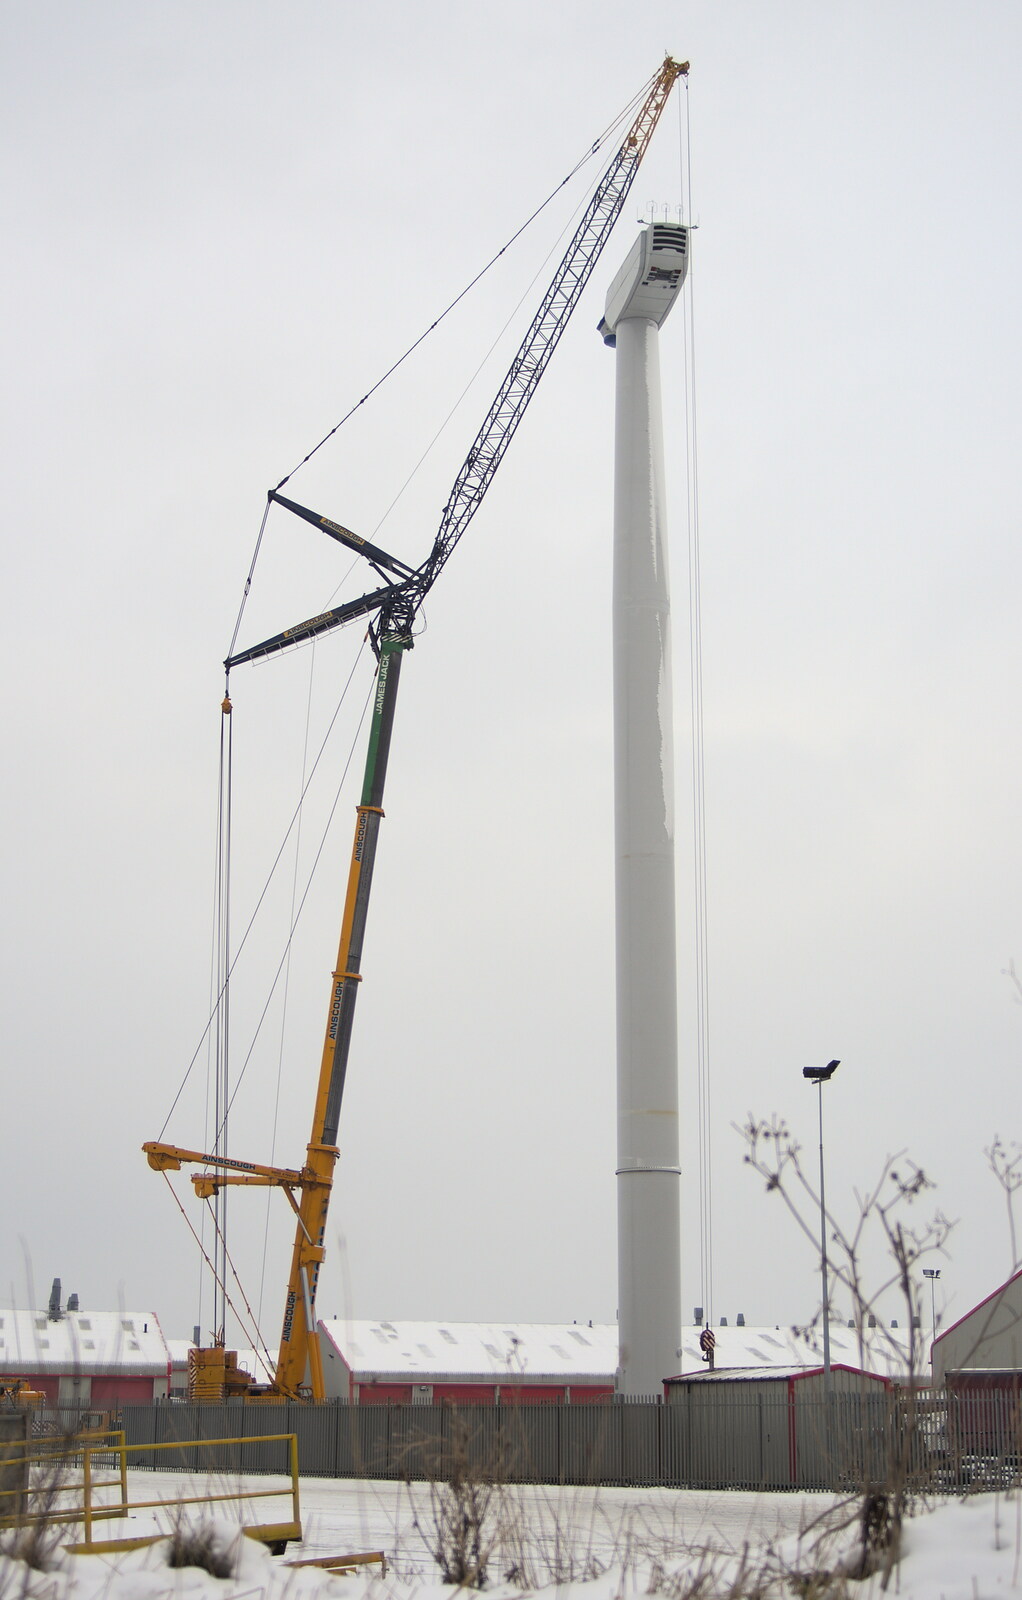 More Snow Days and a Wind Turbine is Built, Brome, Suffolk - 19th January 2013: A epic crane does its thing